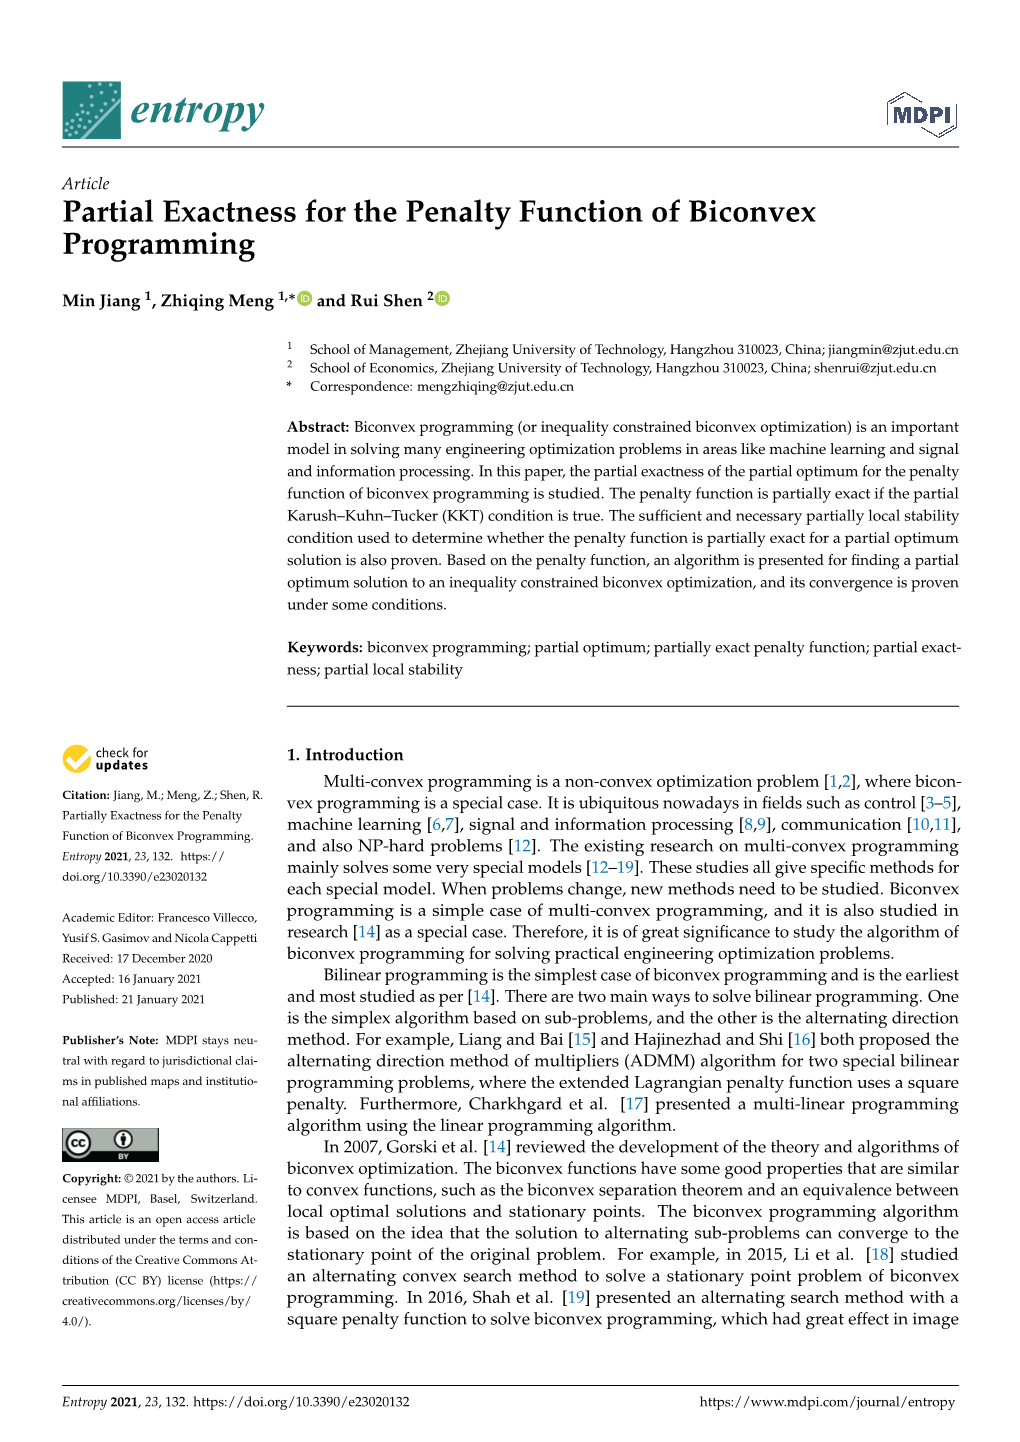 Partial Exactness for the Penalty Function of Biconvex Programming